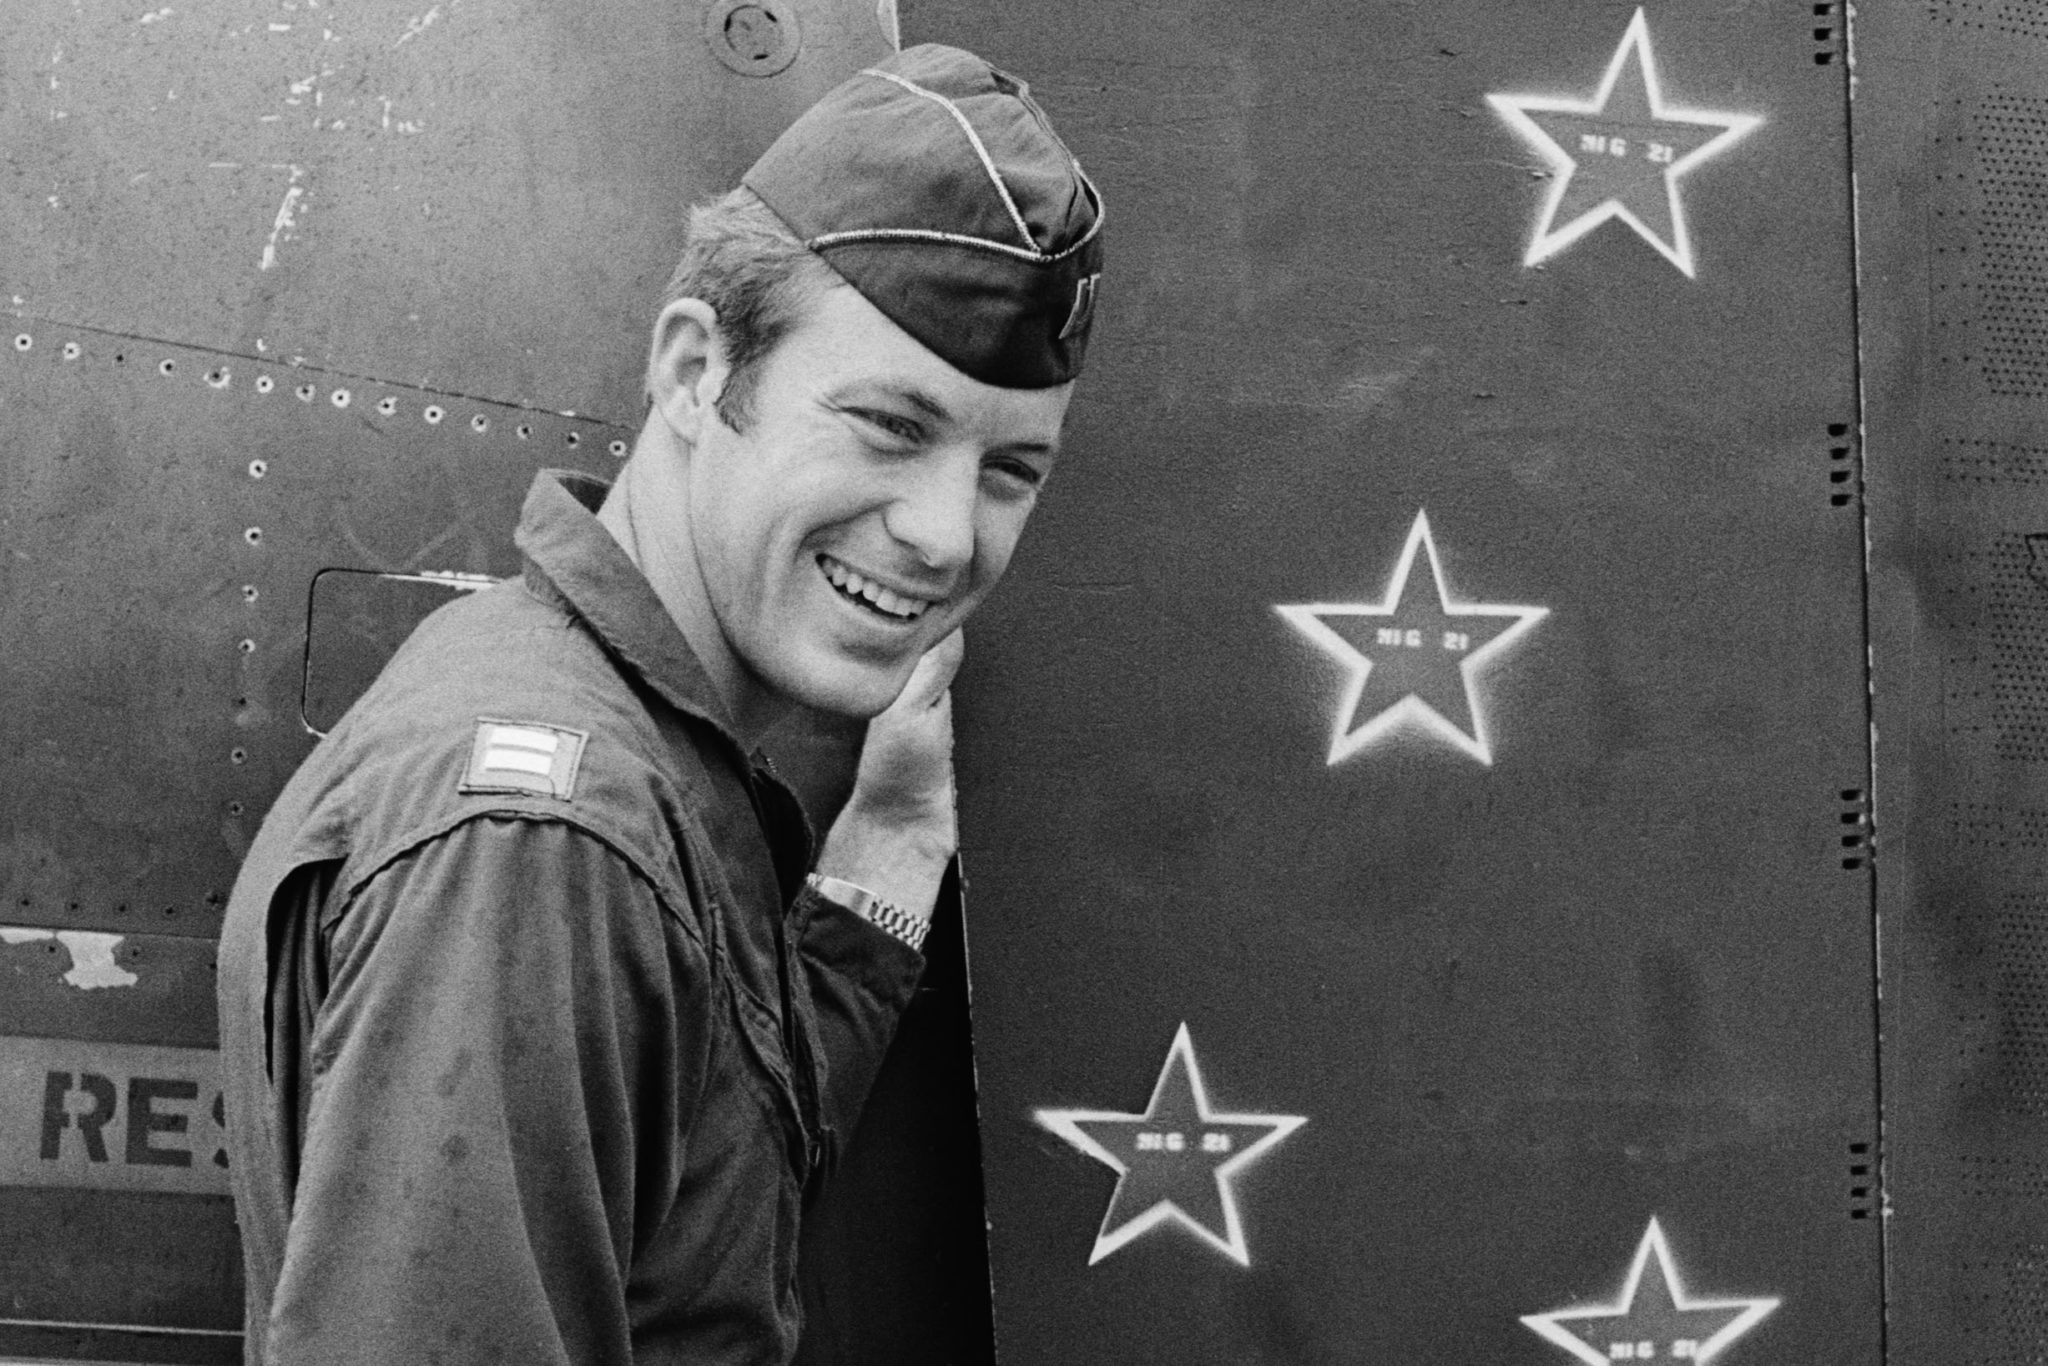 The First Air Force Ace of the Vietnam War Shot Down 2 MiGs in 2 Minutes